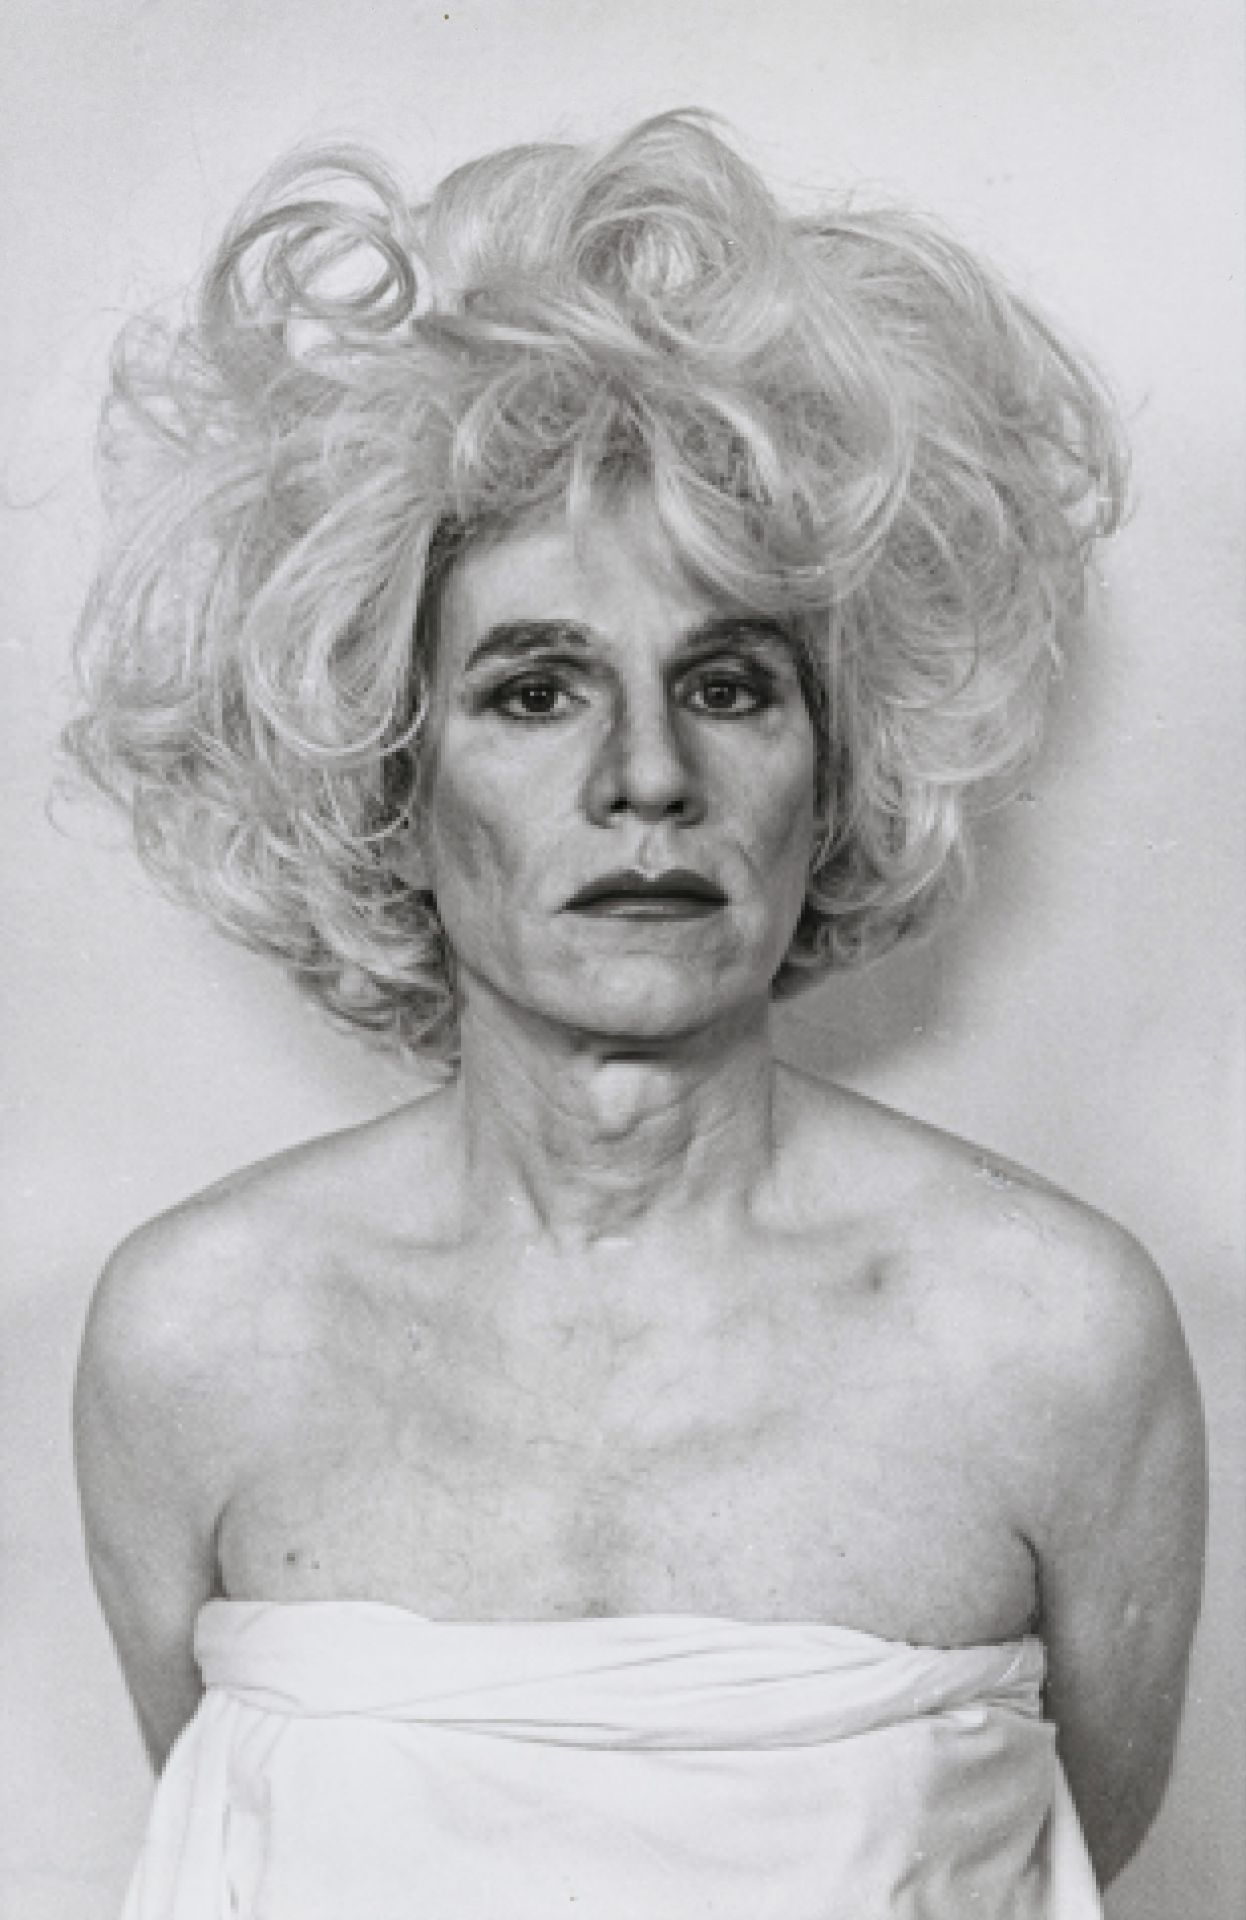 Christopher Makos - Andy Warhol with 6 different wigs from the Altered Images series. 1981/2001 - Image 5 of 7